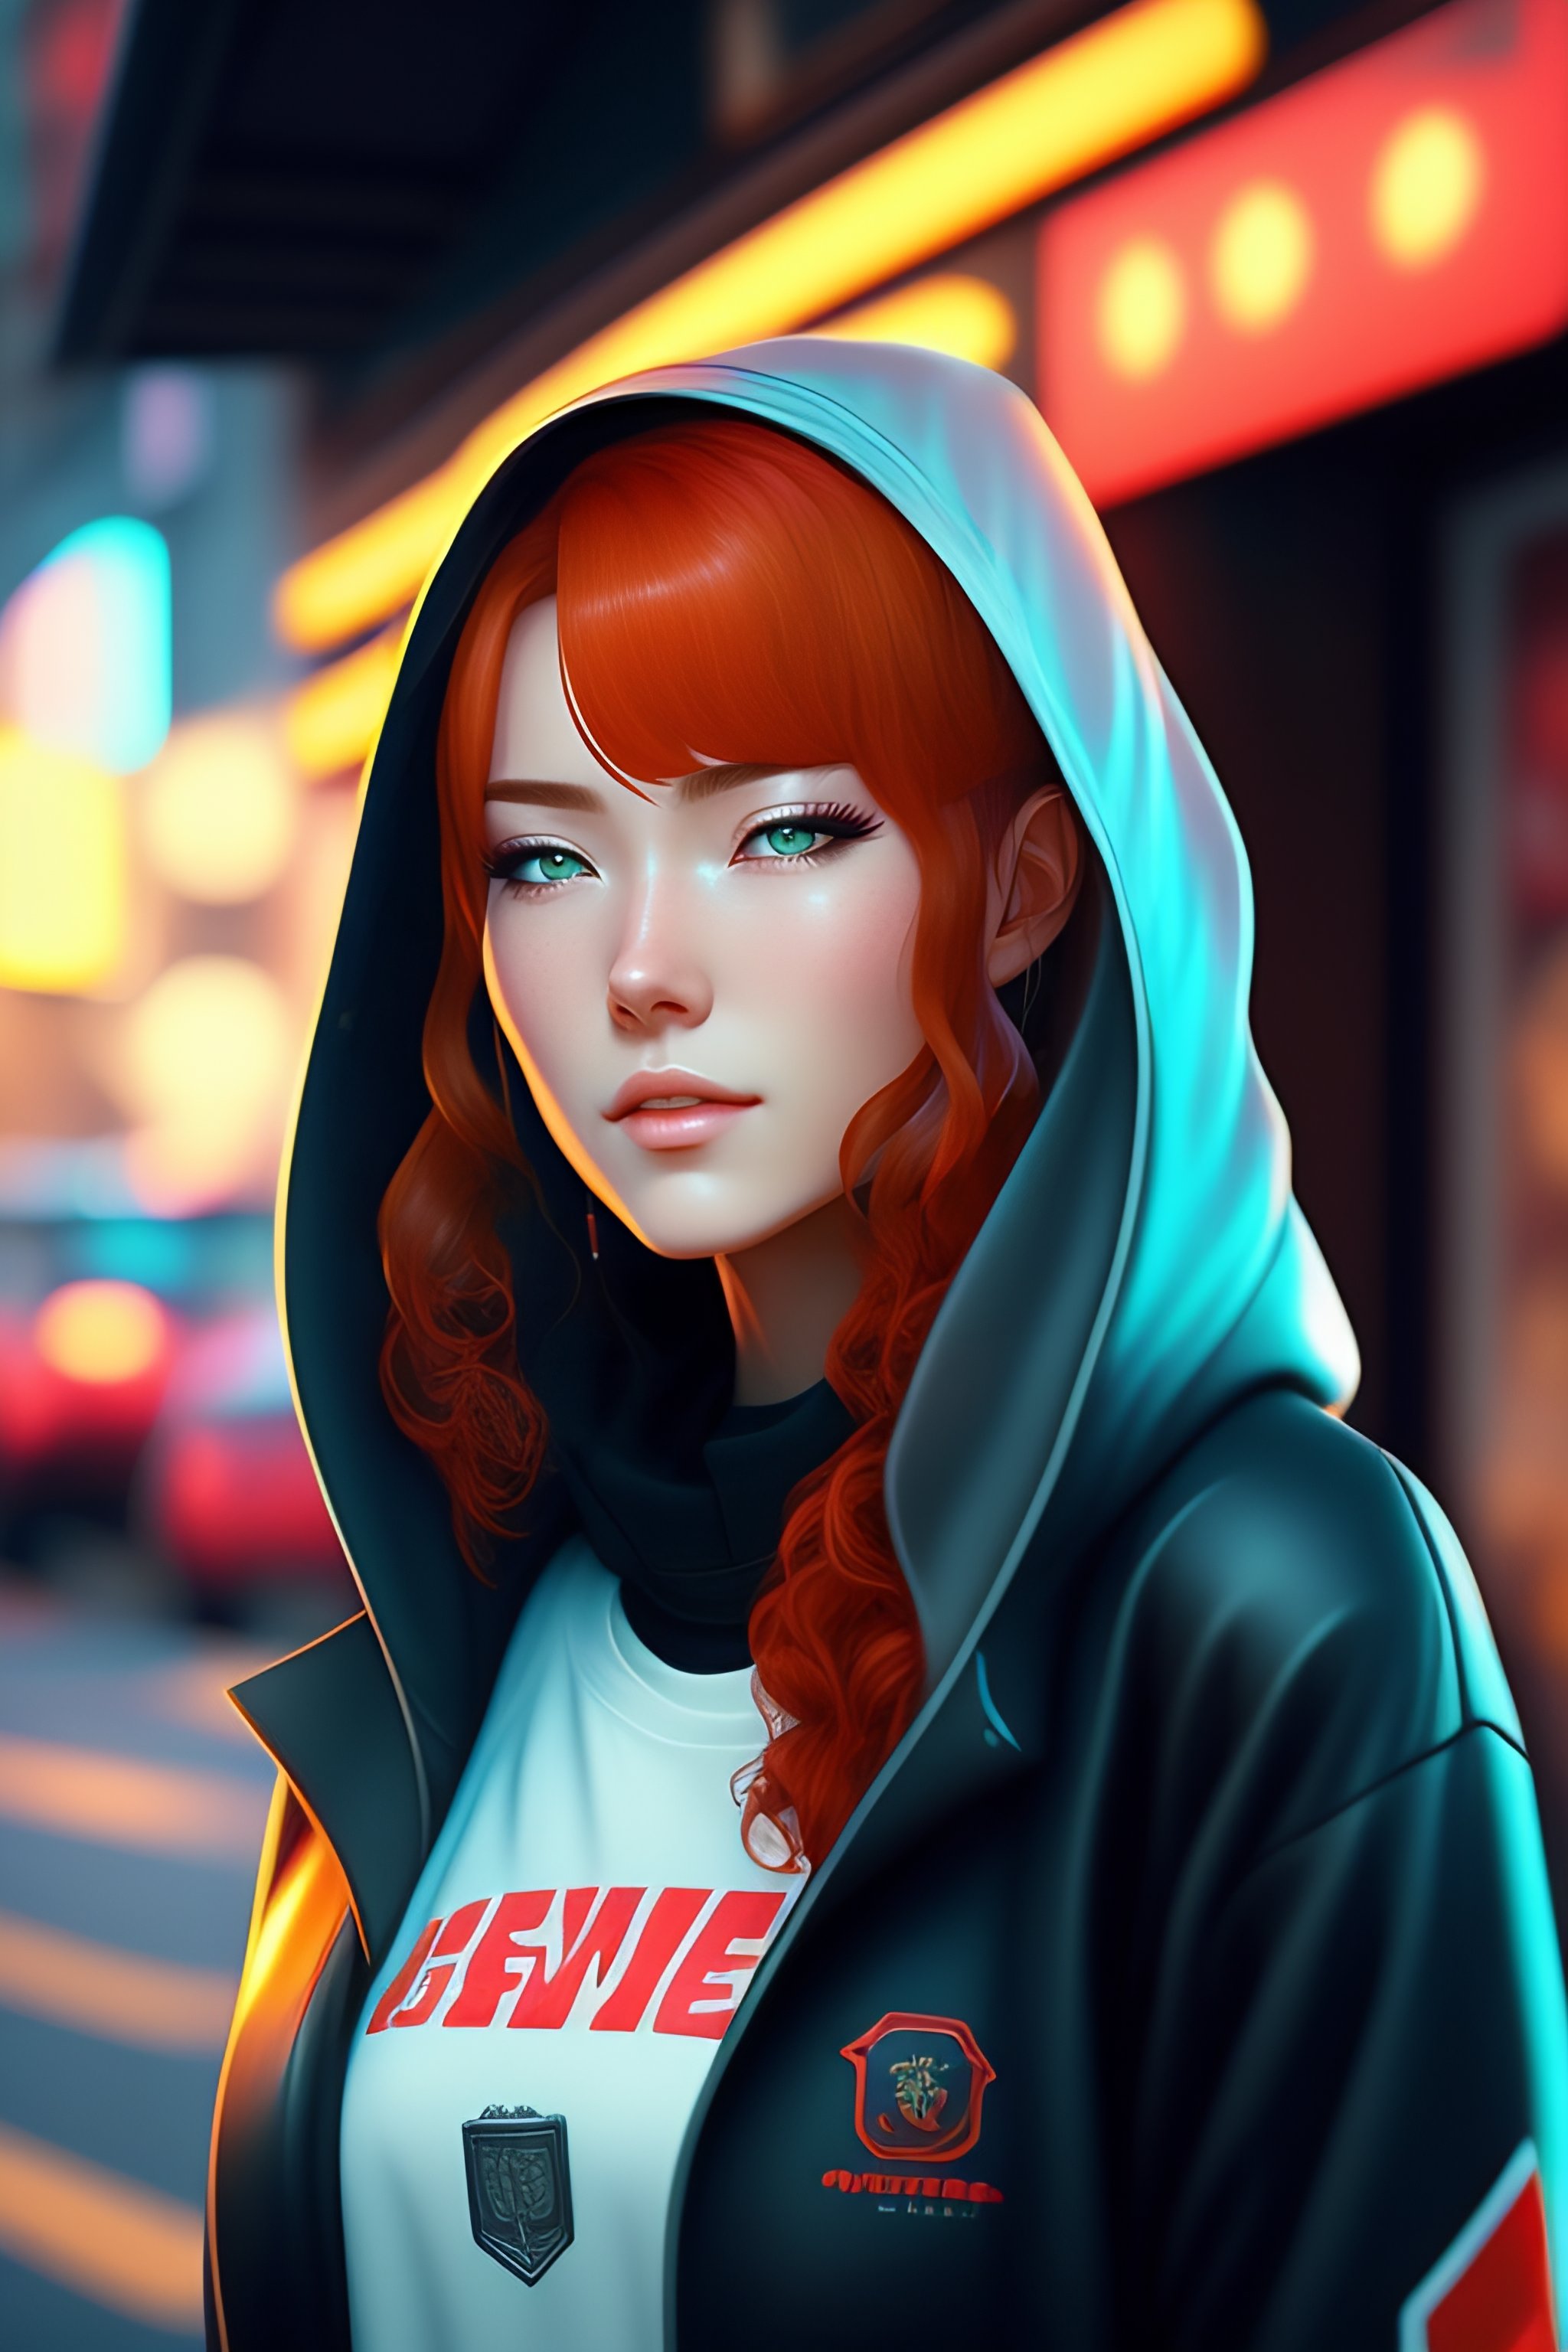 Lexica Cyberpunk City Setting Realistic Young Anime White Woman Wearing A Hoodie Under A 2008